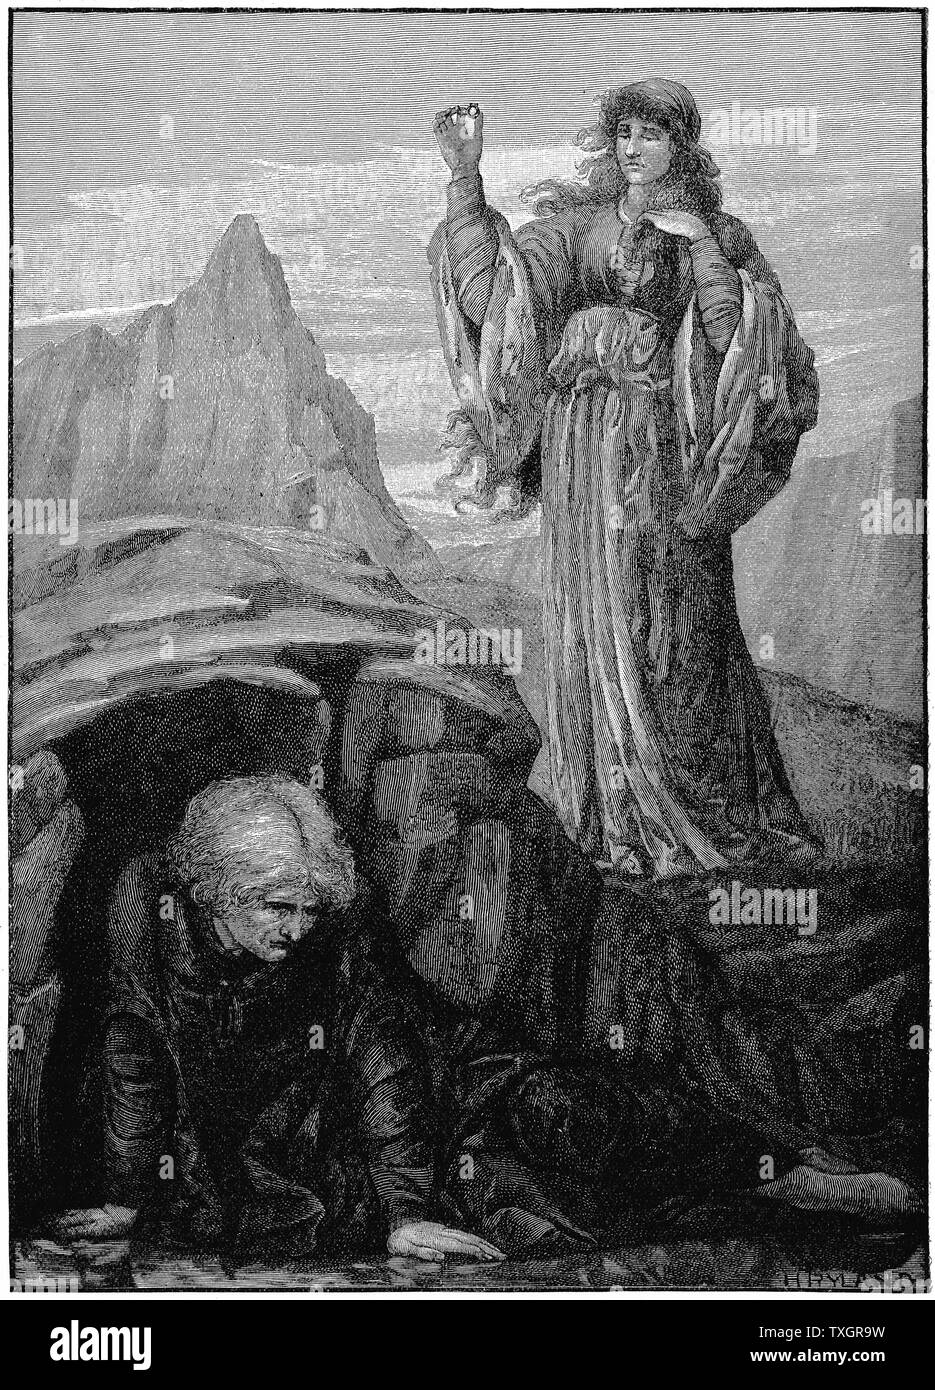 Thomas Malory (d.1471) Morte d'Arthur. Morgan le Fay casts spell on Merlin.  Engraving after Henry Ryland (1856-1924) English painter and illustrator Stock Photo